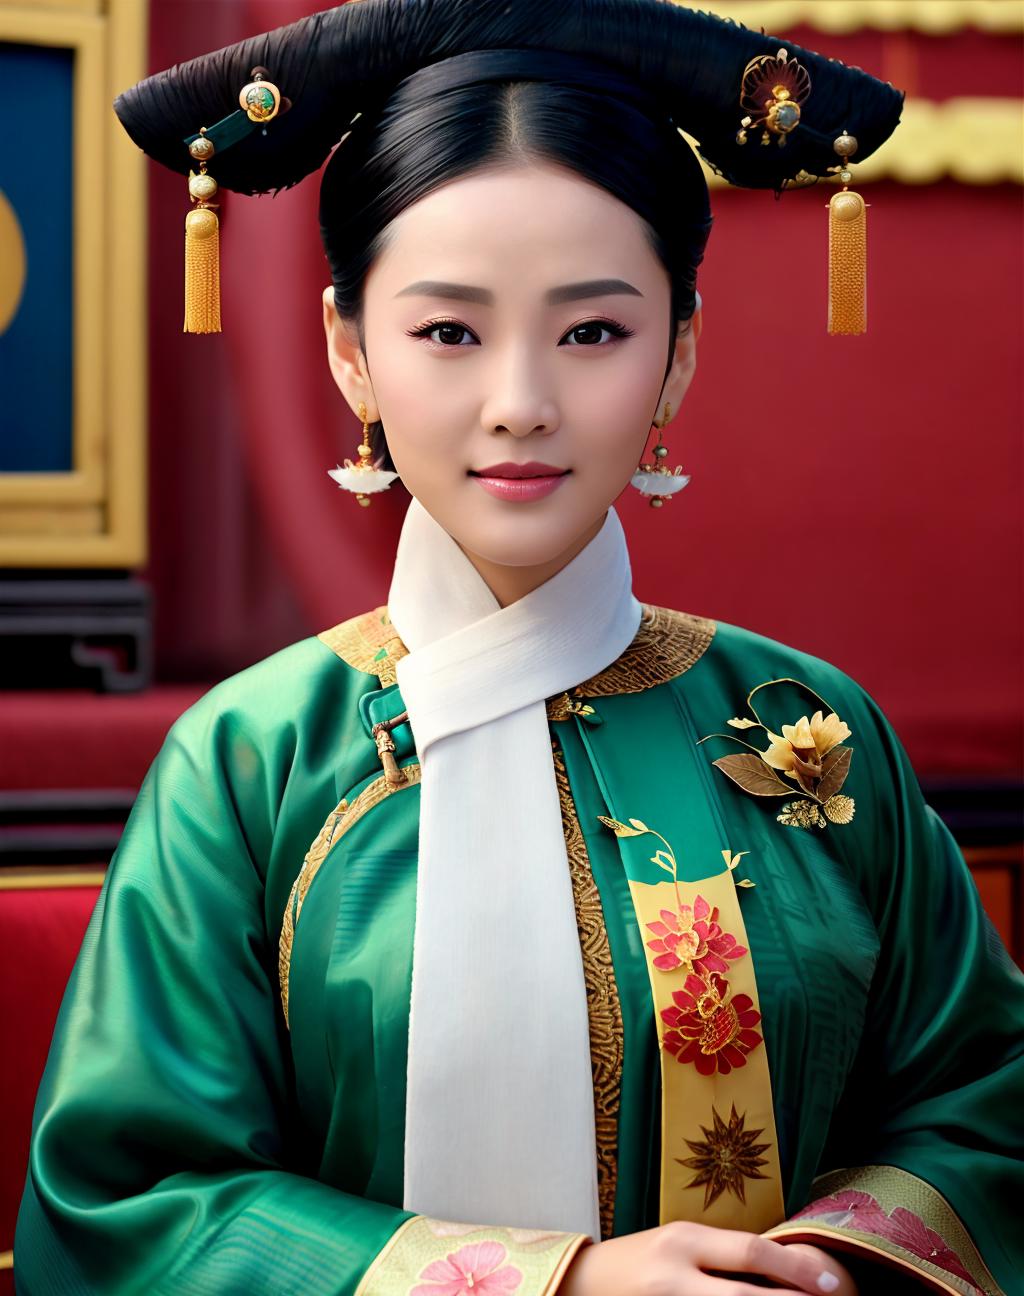 Qing Period Dresses - 清代后宫服 image by EDG